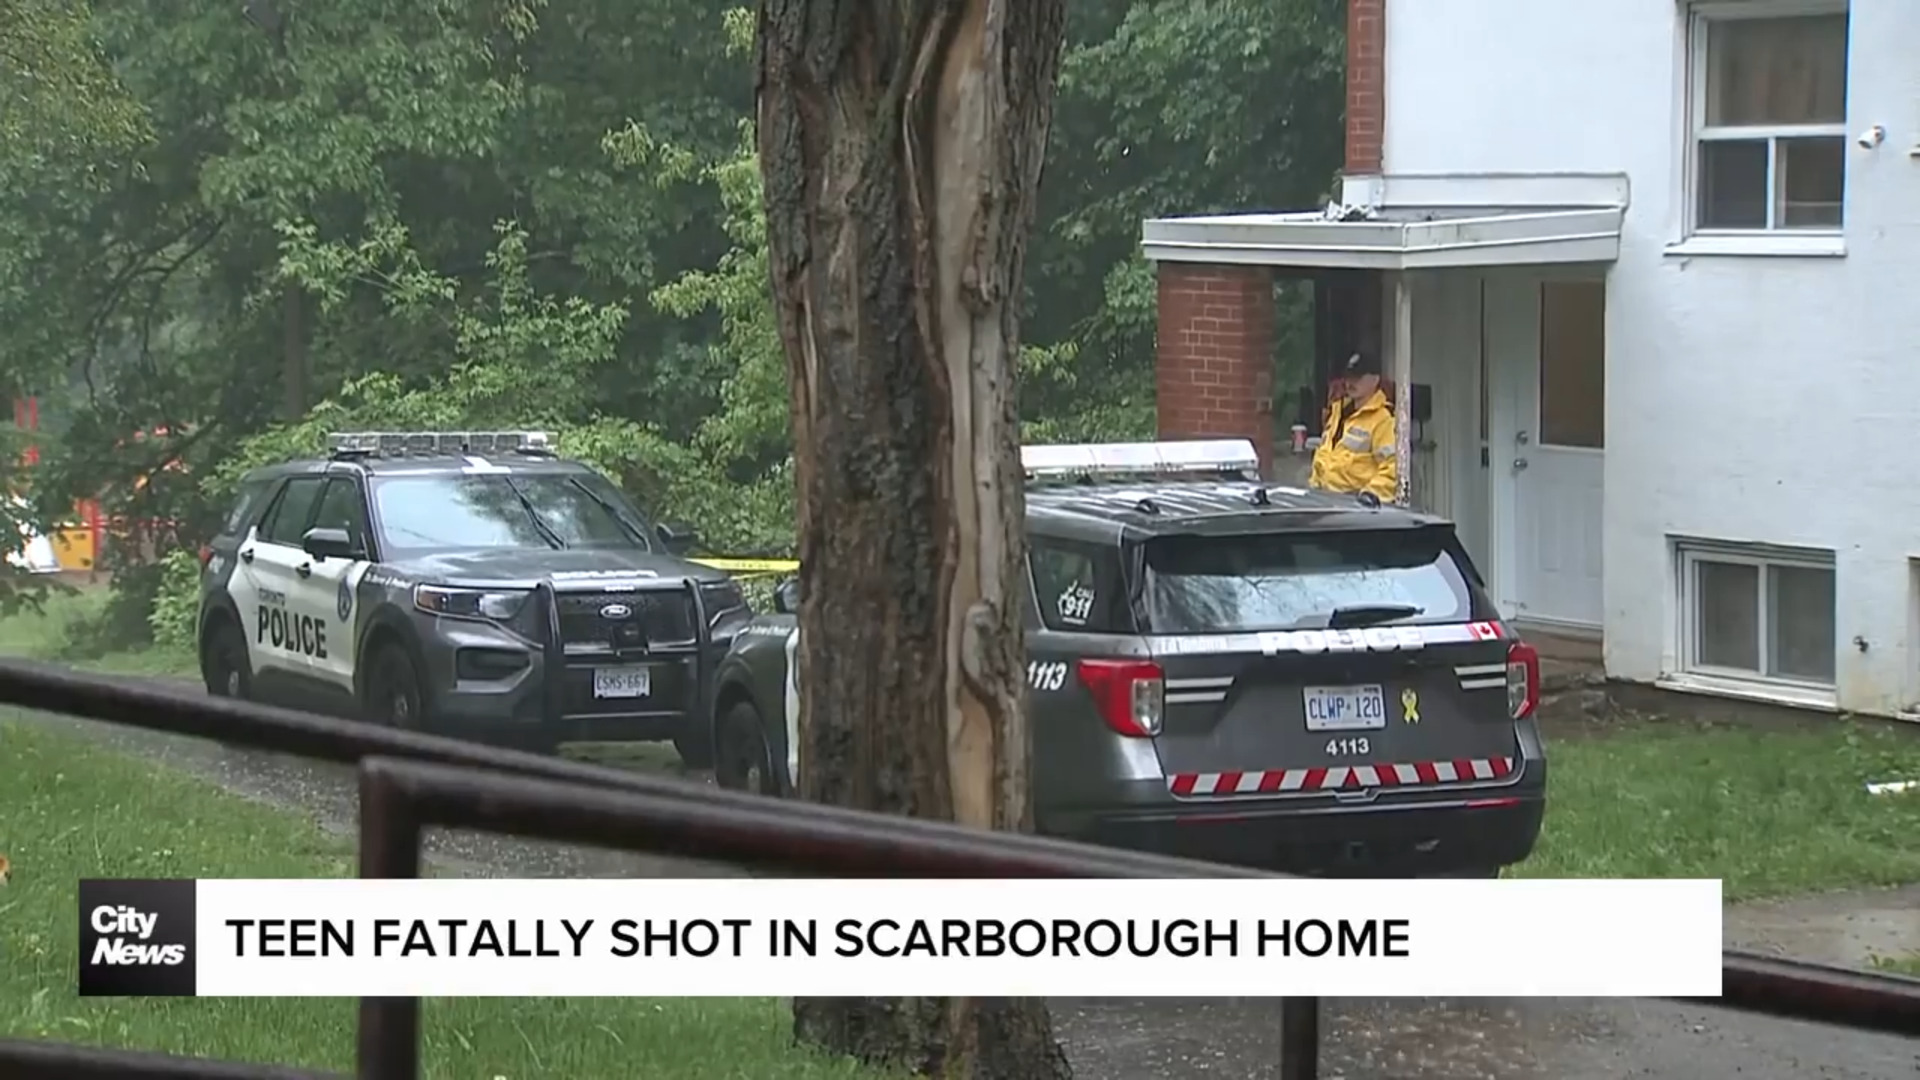 16-year-old boy dead after overnight shooting in Scarborough home